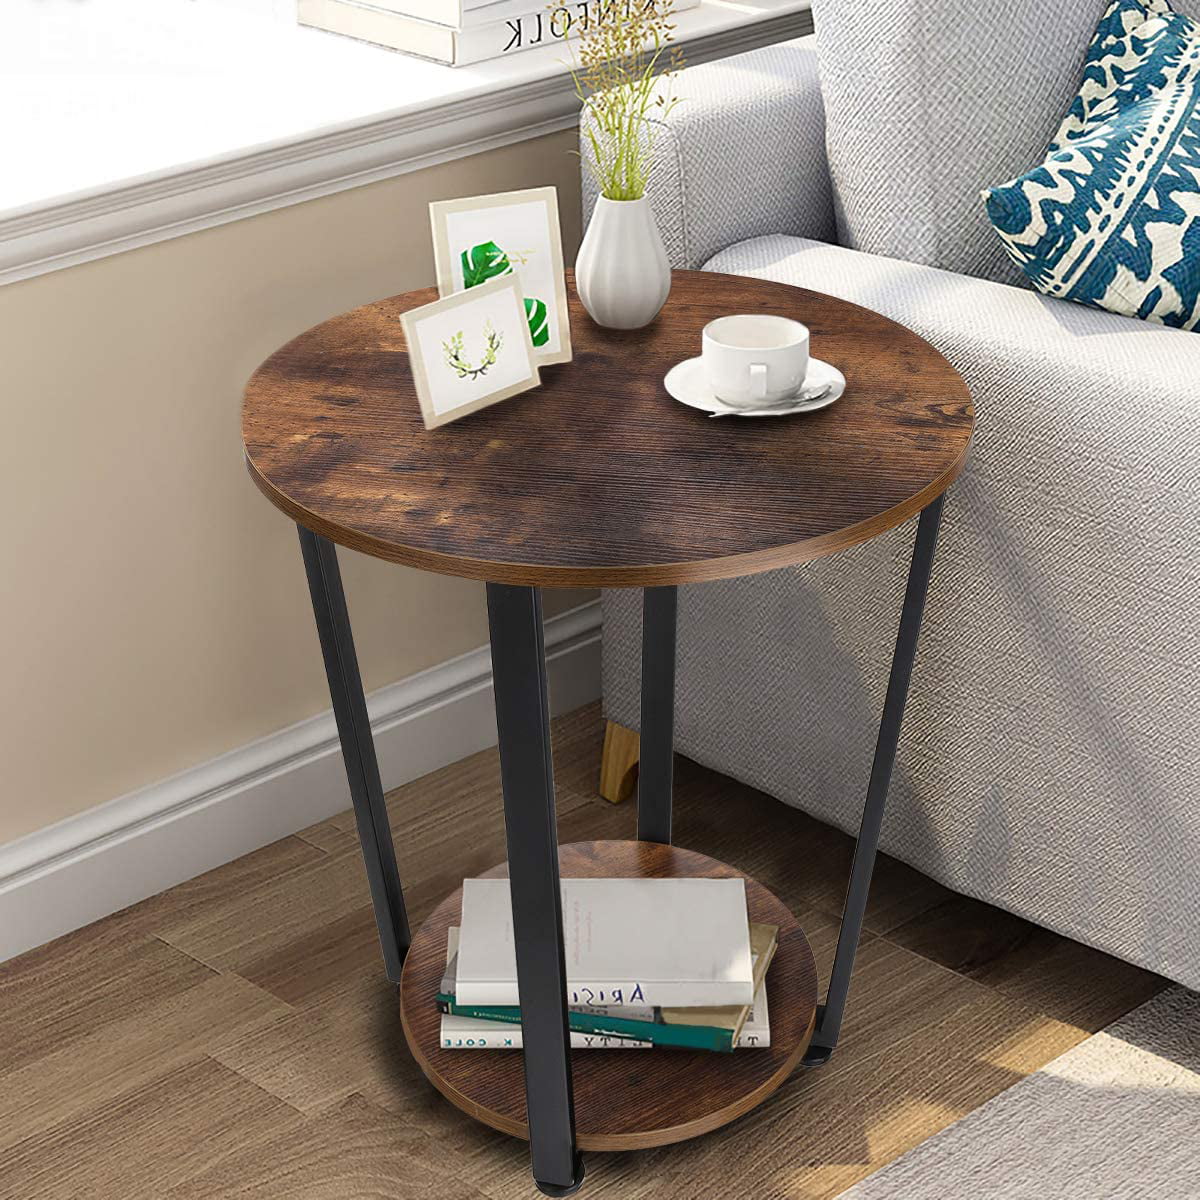 Round Accent Bedside Table 2 Tier End Table for Living Room Bedroom